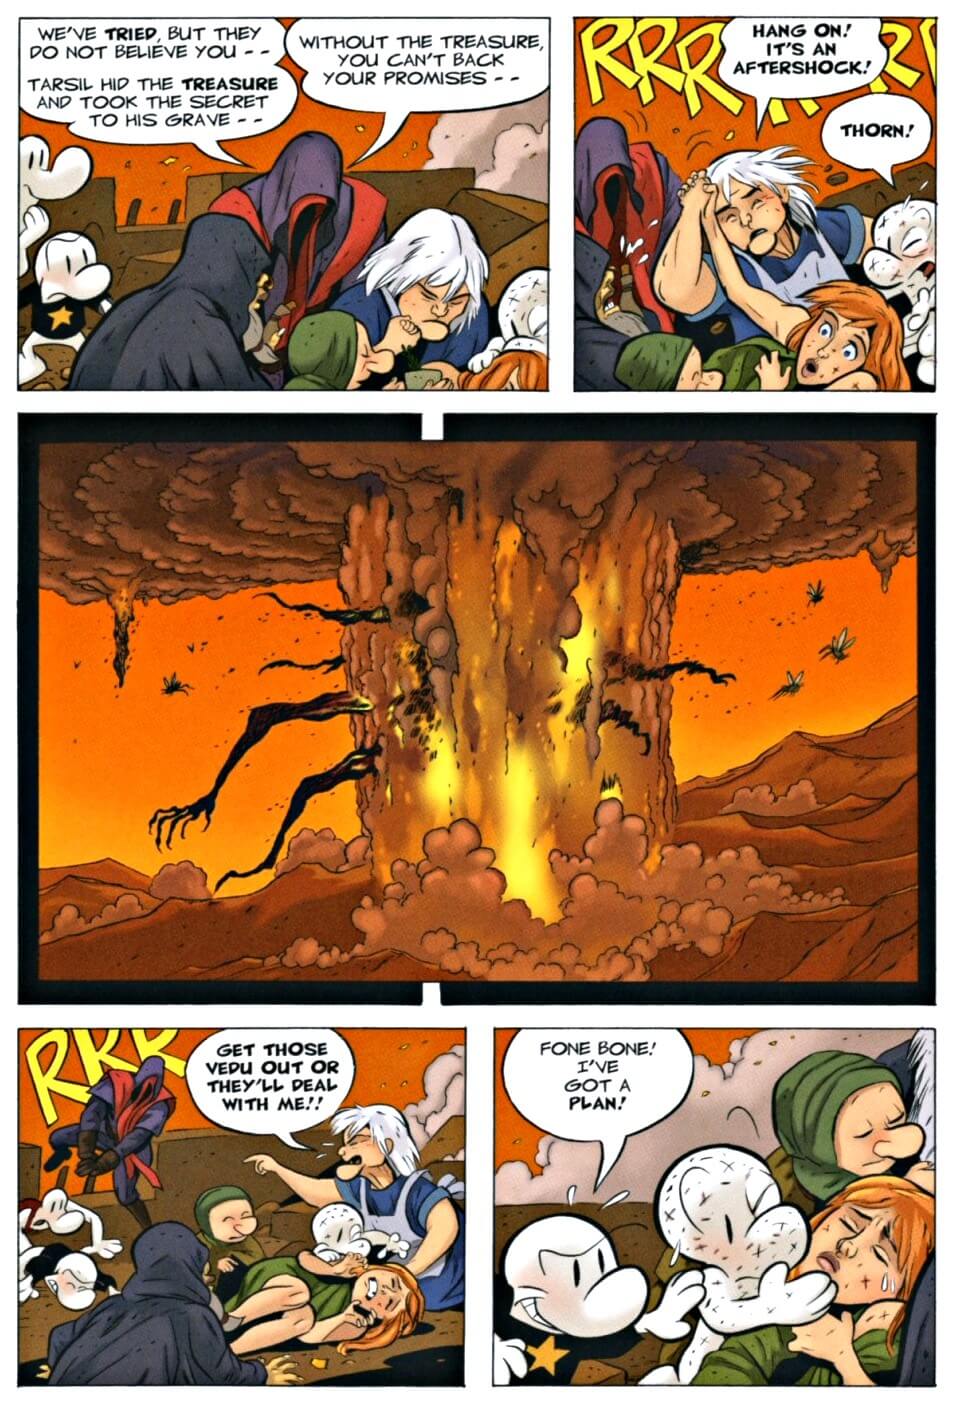 page 67 chapter 3 of bone 9 crown of horns graphic novel